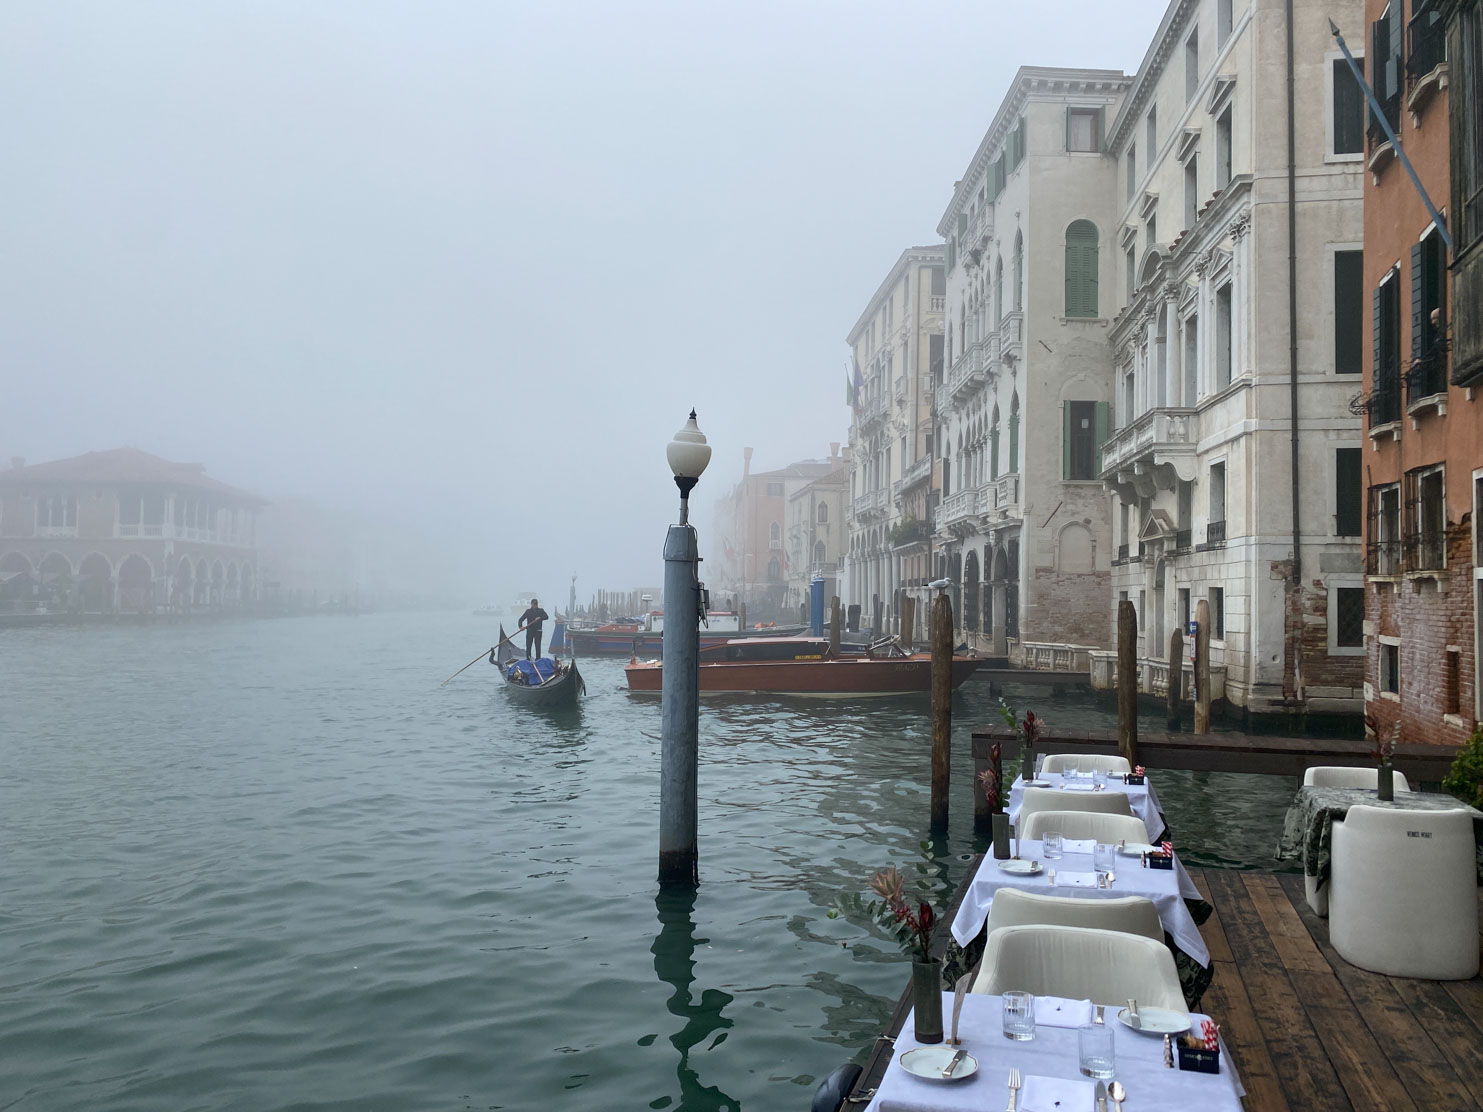 The Venice Venice Hotel And here she is: The poetic Venetian fog, courtesy of a visit in cool season 